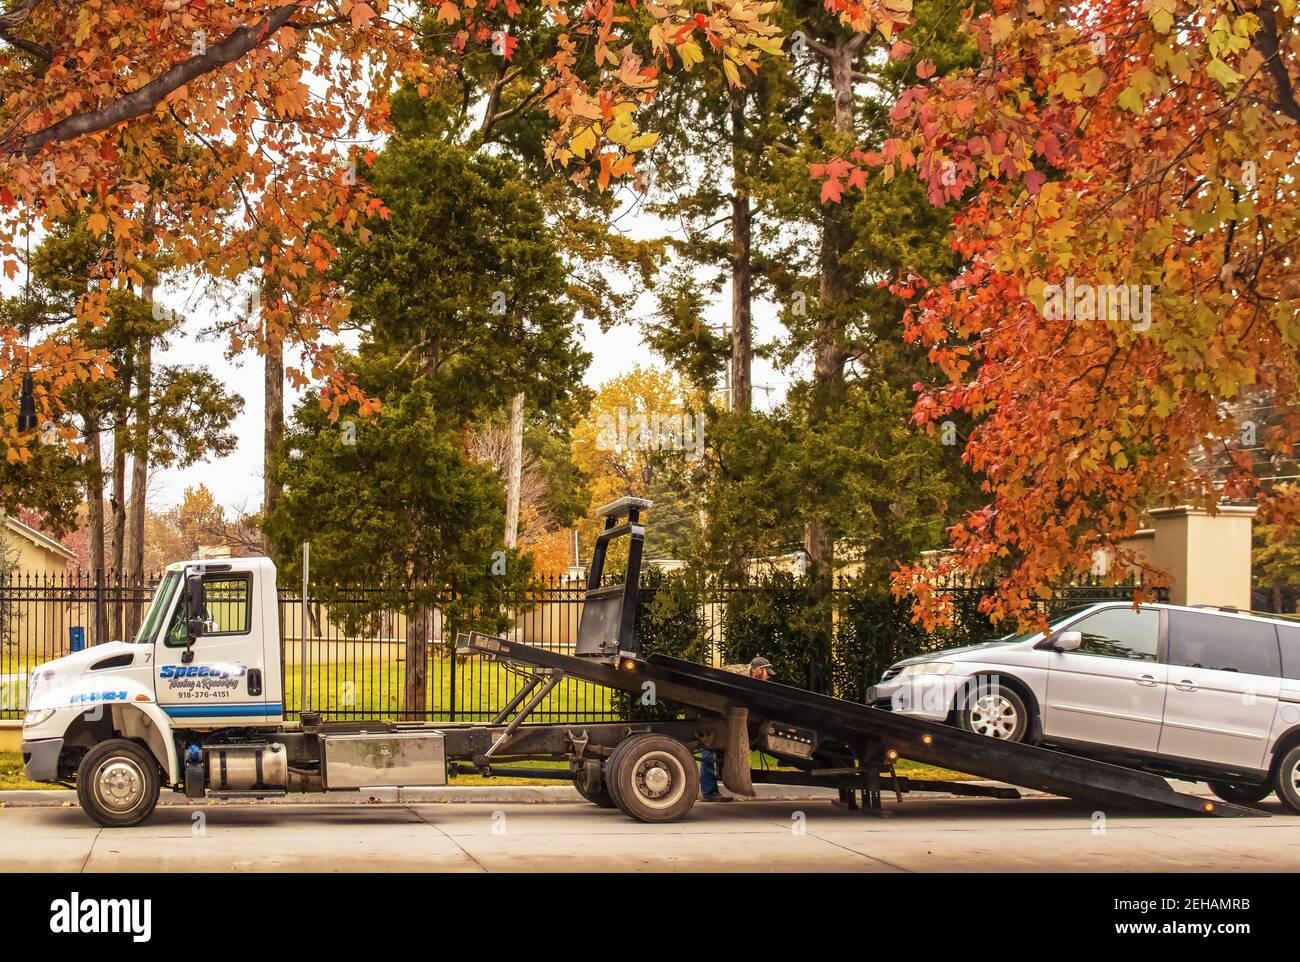 2018 11 18 Tulsa USA Tow truck with operator making adjustments a van is loaded on trailer on street on a beautiful and colorful autumn day in front o Stock Photo